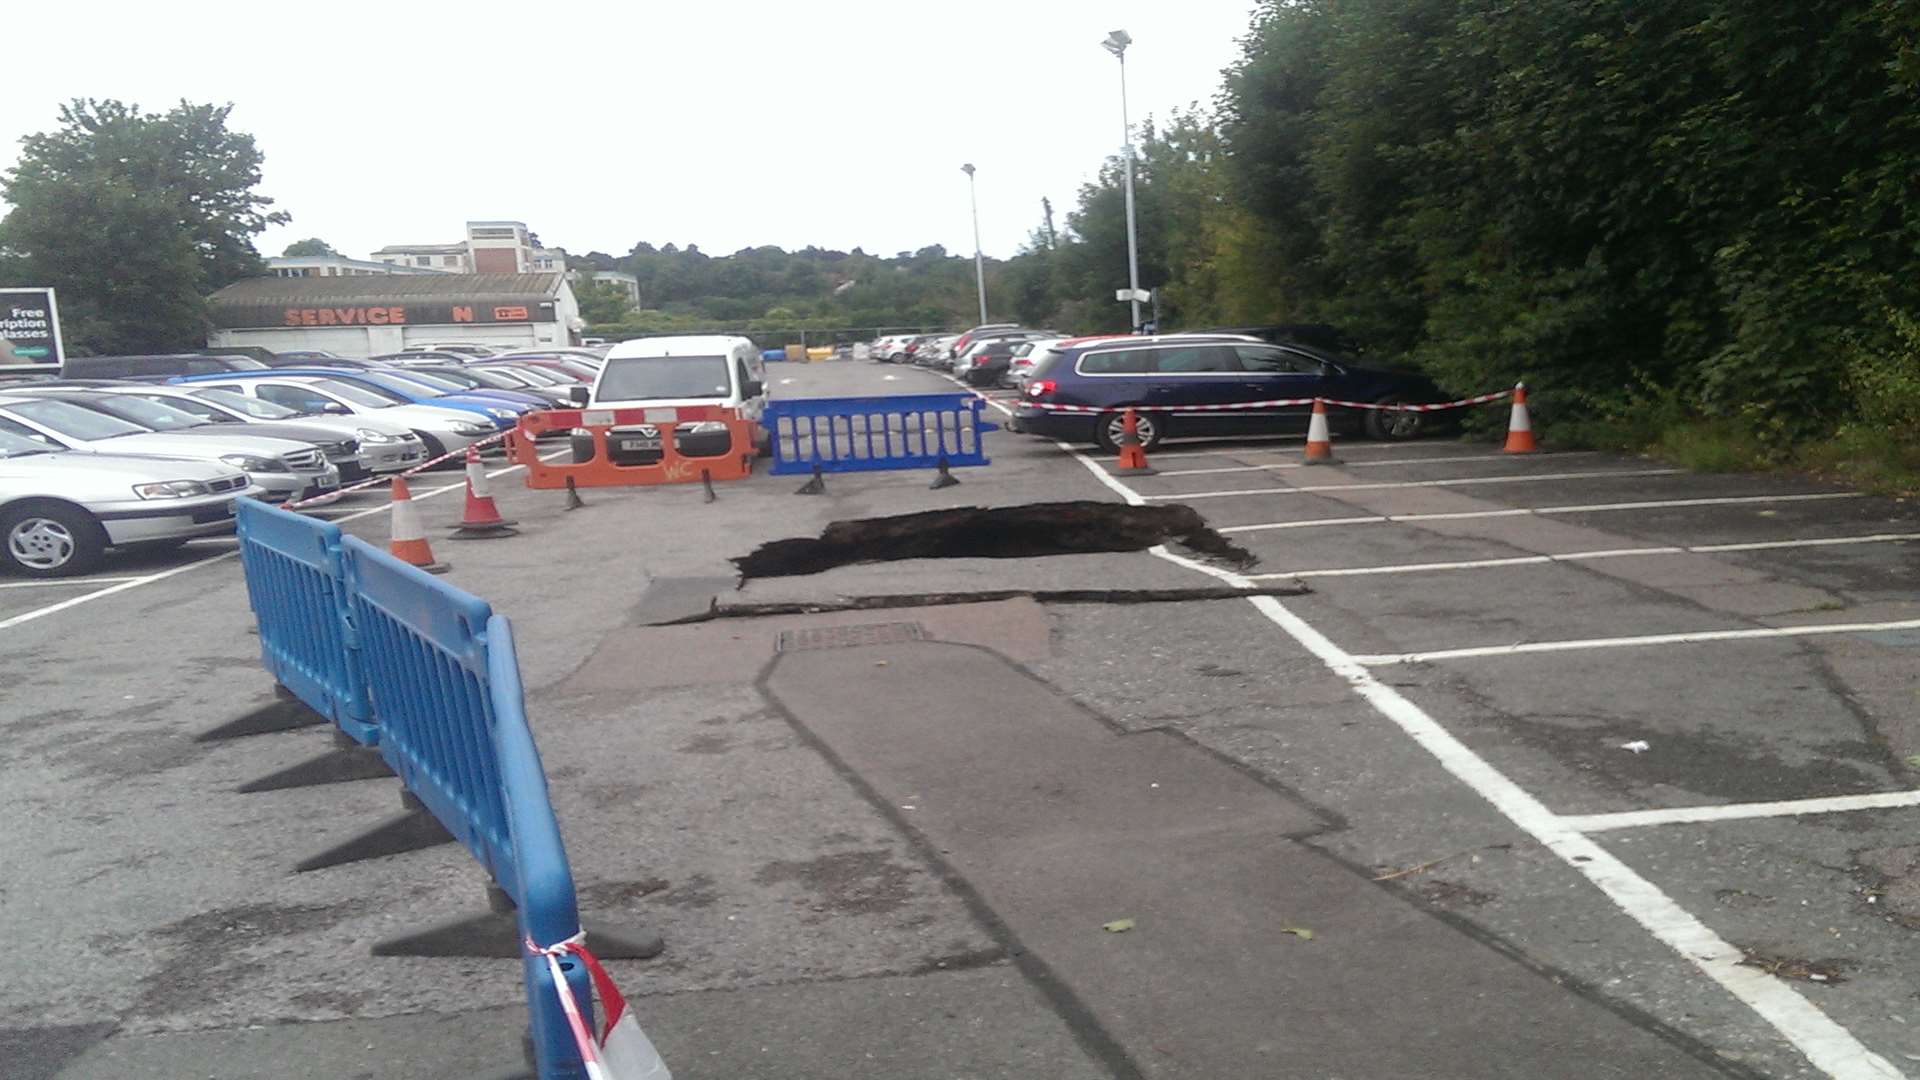 The chasm has been sealed off for safety. Picture: Pete Clarke